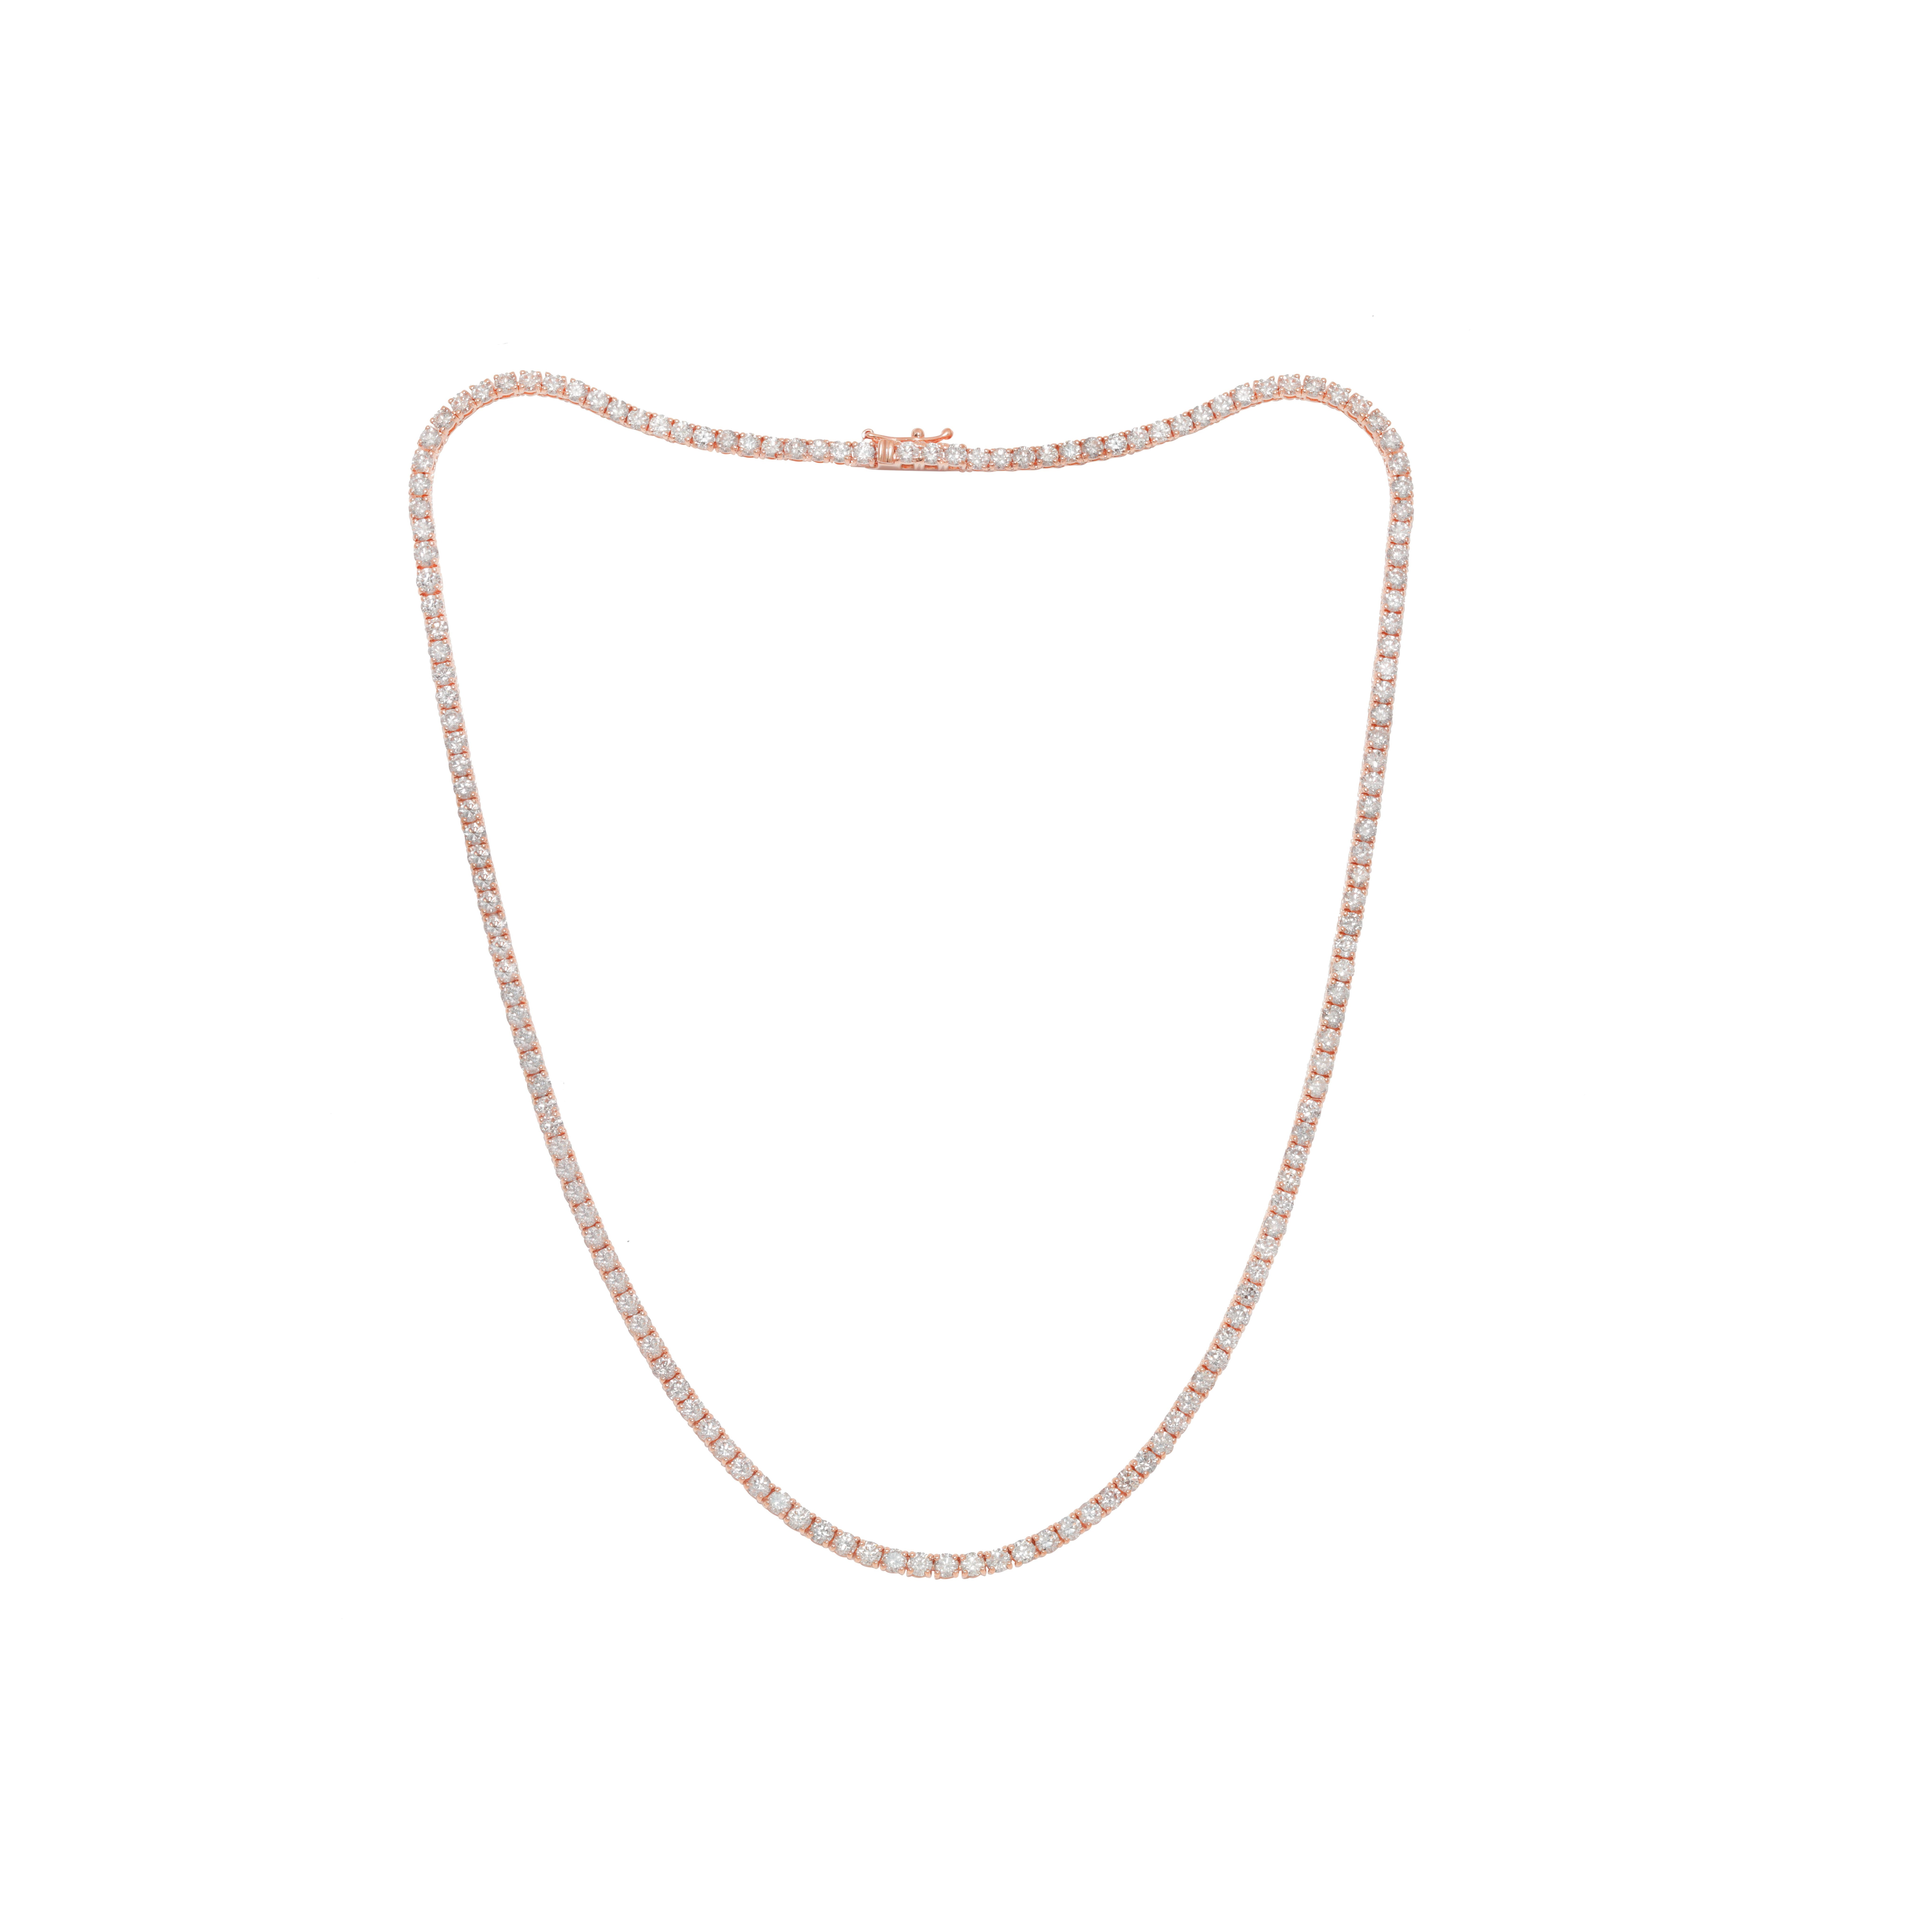 14K Rose Gold Classic Tennis Necklaces 8.06Cts, 168St. Diana M. is a leading supplier of top-quality fine jewelry for over 35 years.
Diana M is one-stop shop for all your jewelry shopping, carrying line of diamond rings, earrings, bracelets,